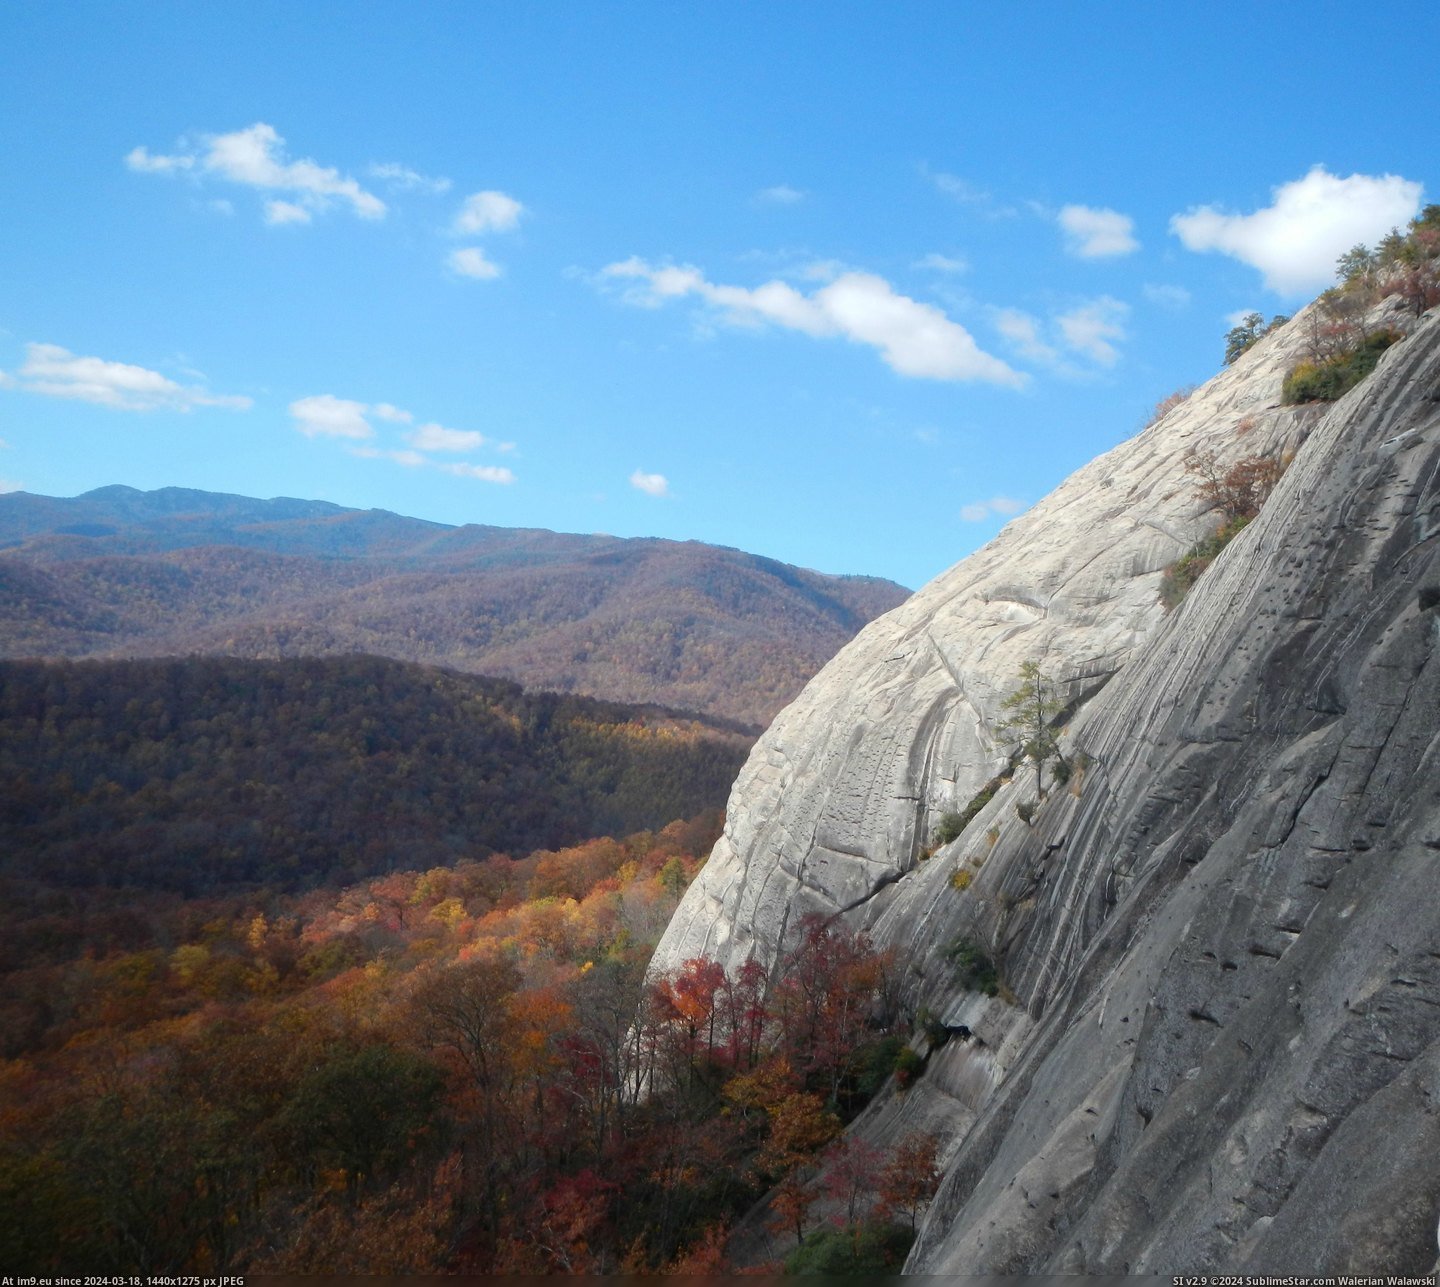 #National #Forest #Route #Climbing #Pisgah #Rock #Glass [Earthporn] From a climbing route on Looking Glass Rock: Pisgah National Forest, NC [OC] [2910x2588] Pic. (Image of album My r/EARTHPORN favs))